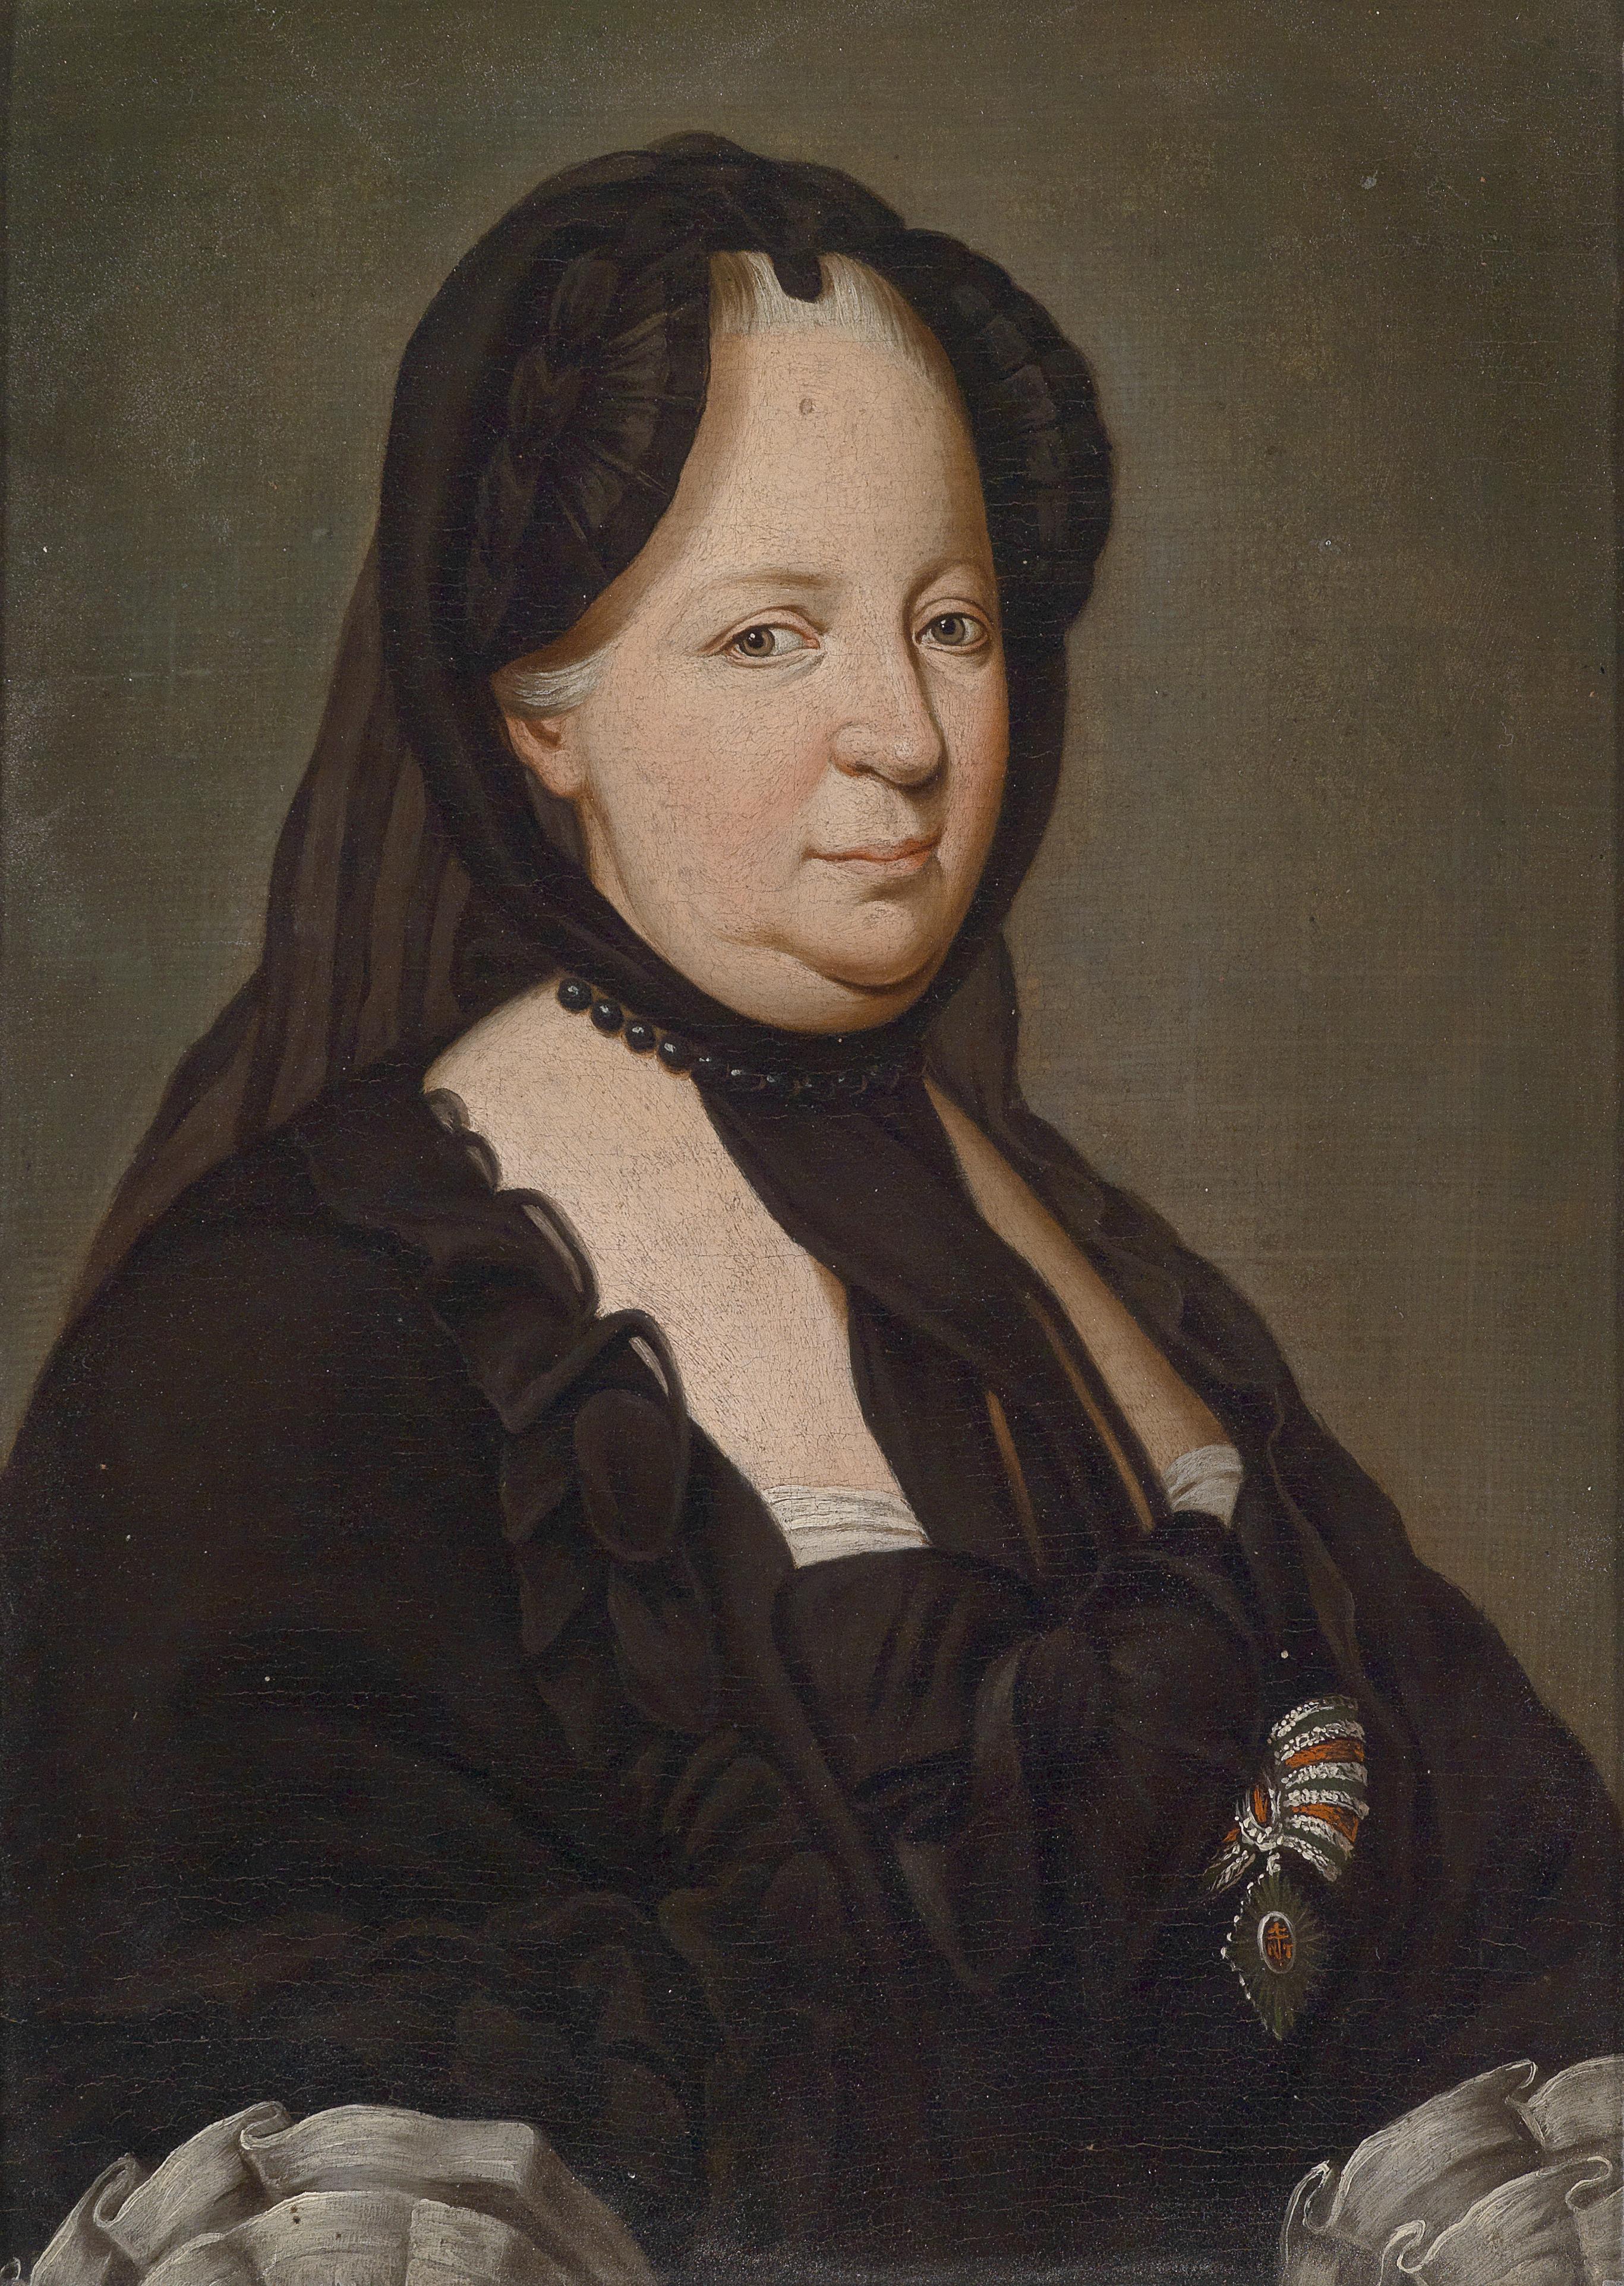 Kaiserin Maria Theresia in Witwentracht c1770